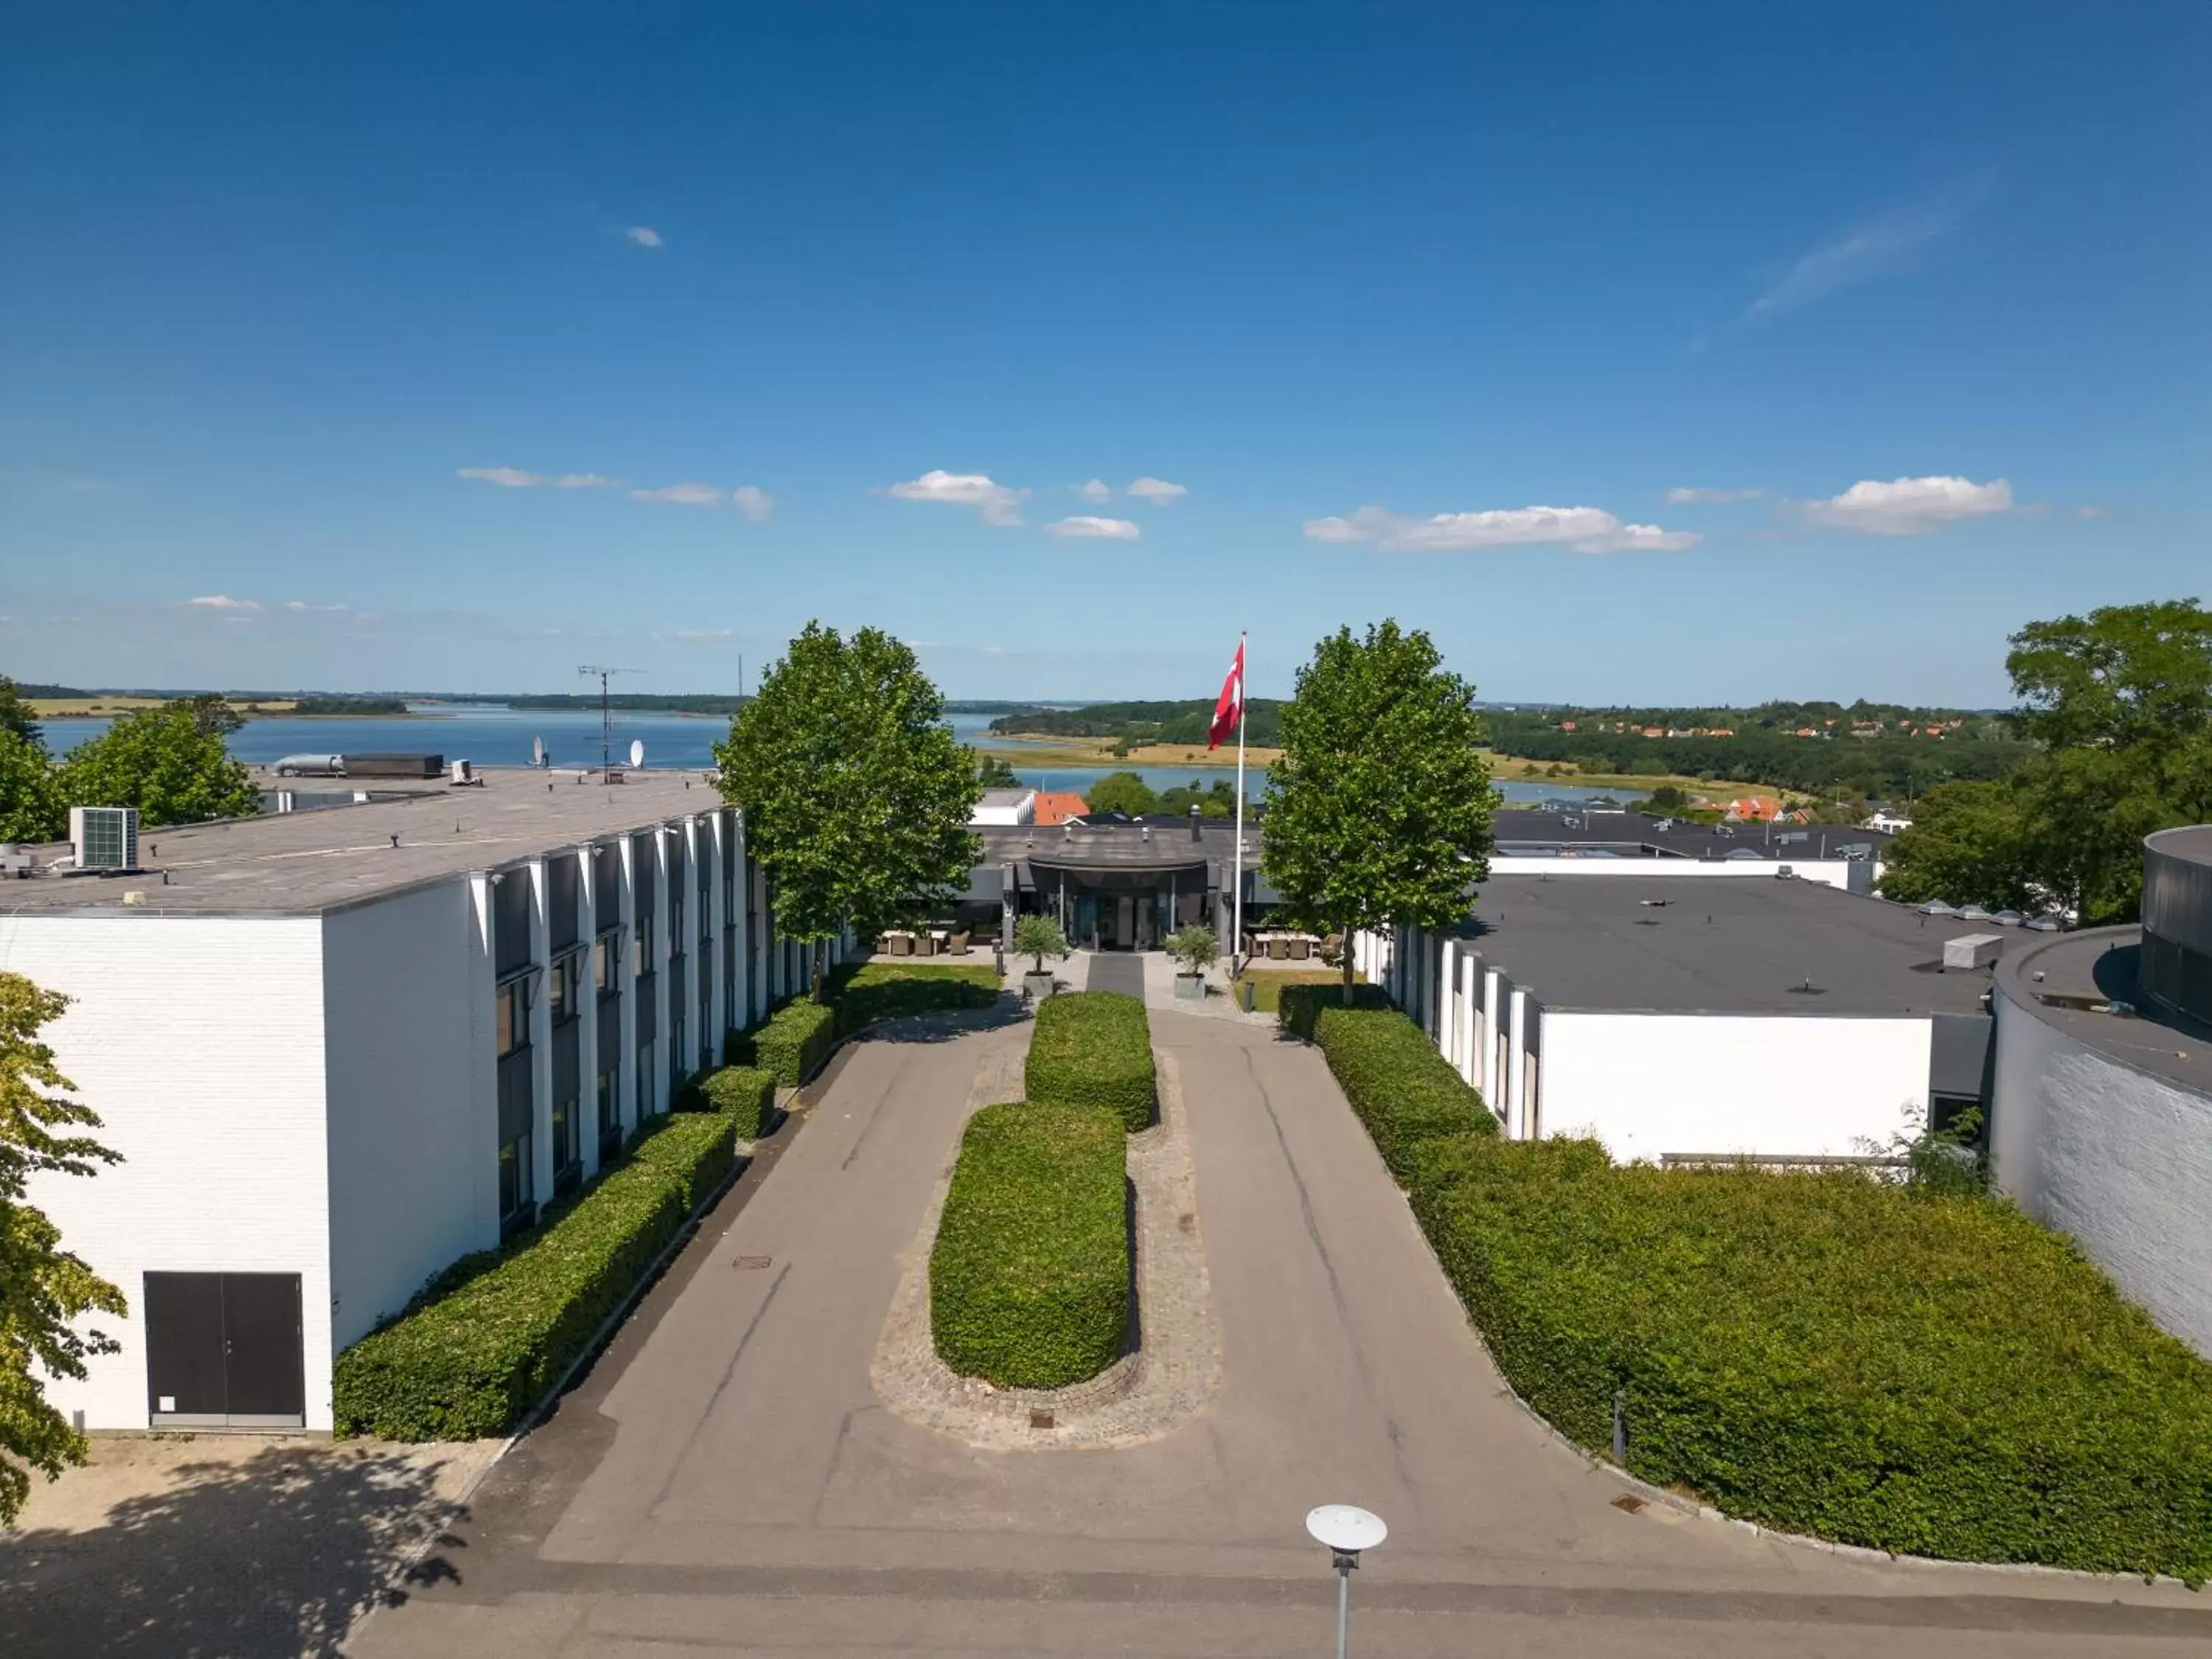 Property building in Comwell Roskilde